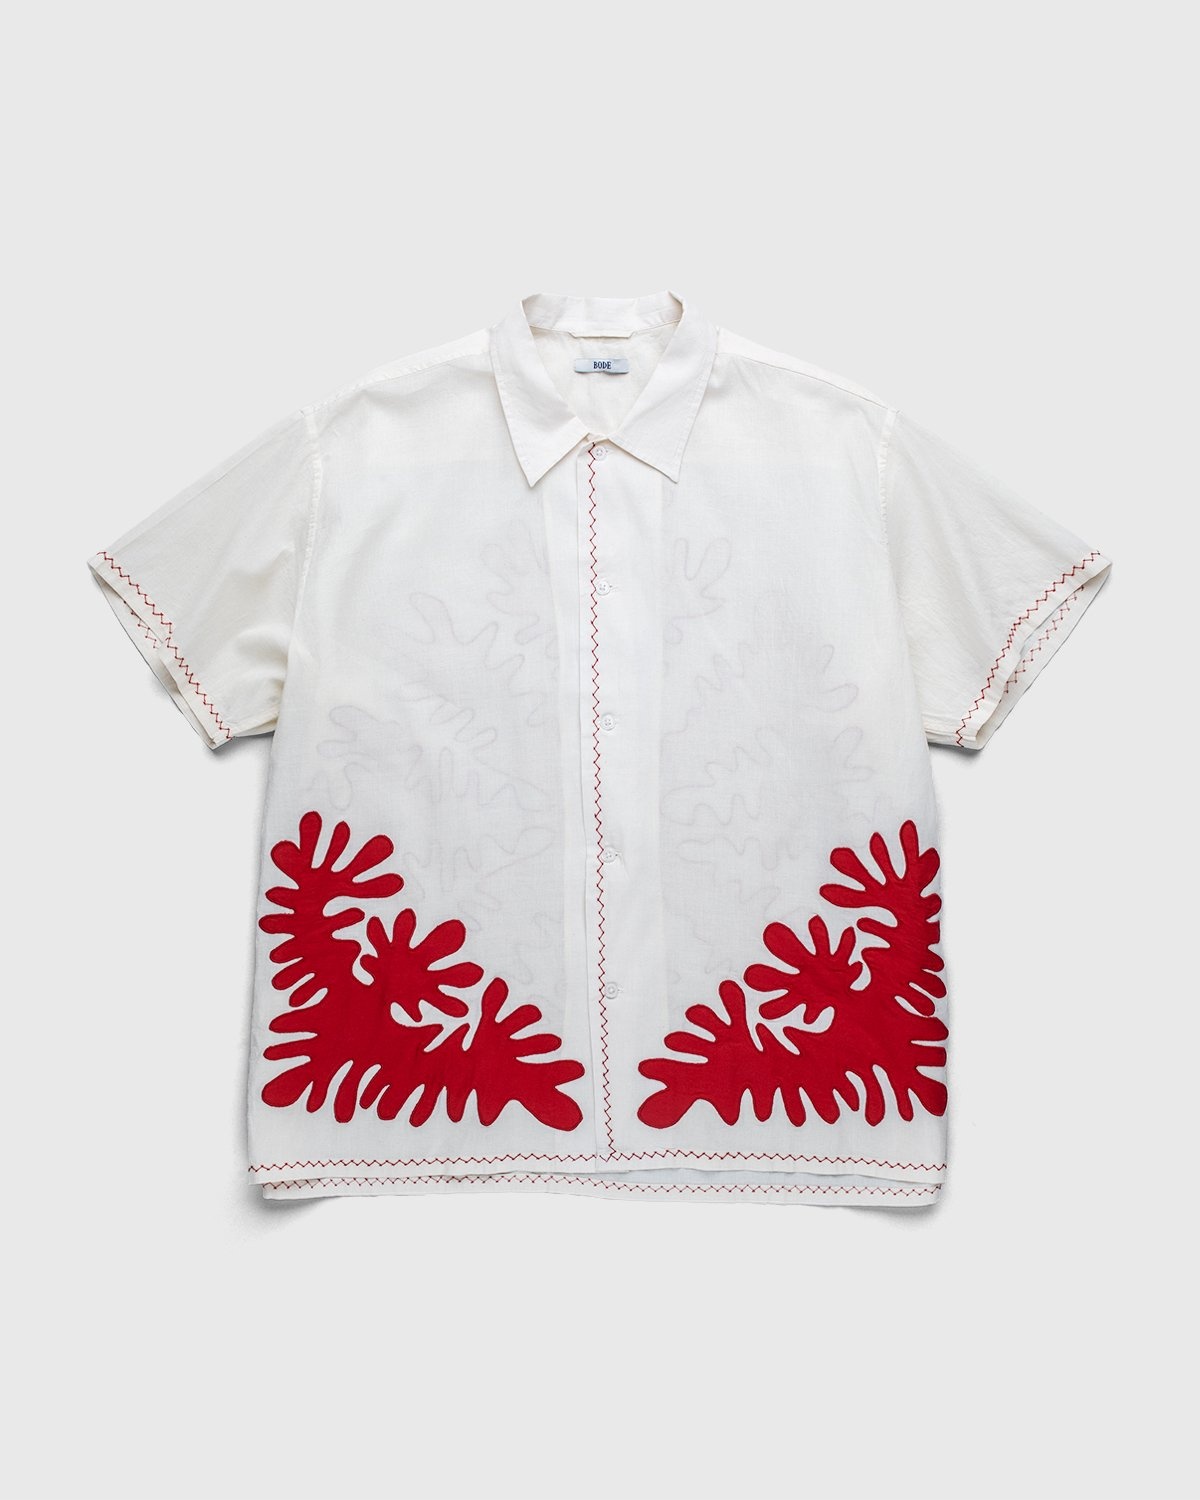 Bode – Setting Cut-Out Appliqué S/S Shirt Natural Red | Highsnobiety Shop